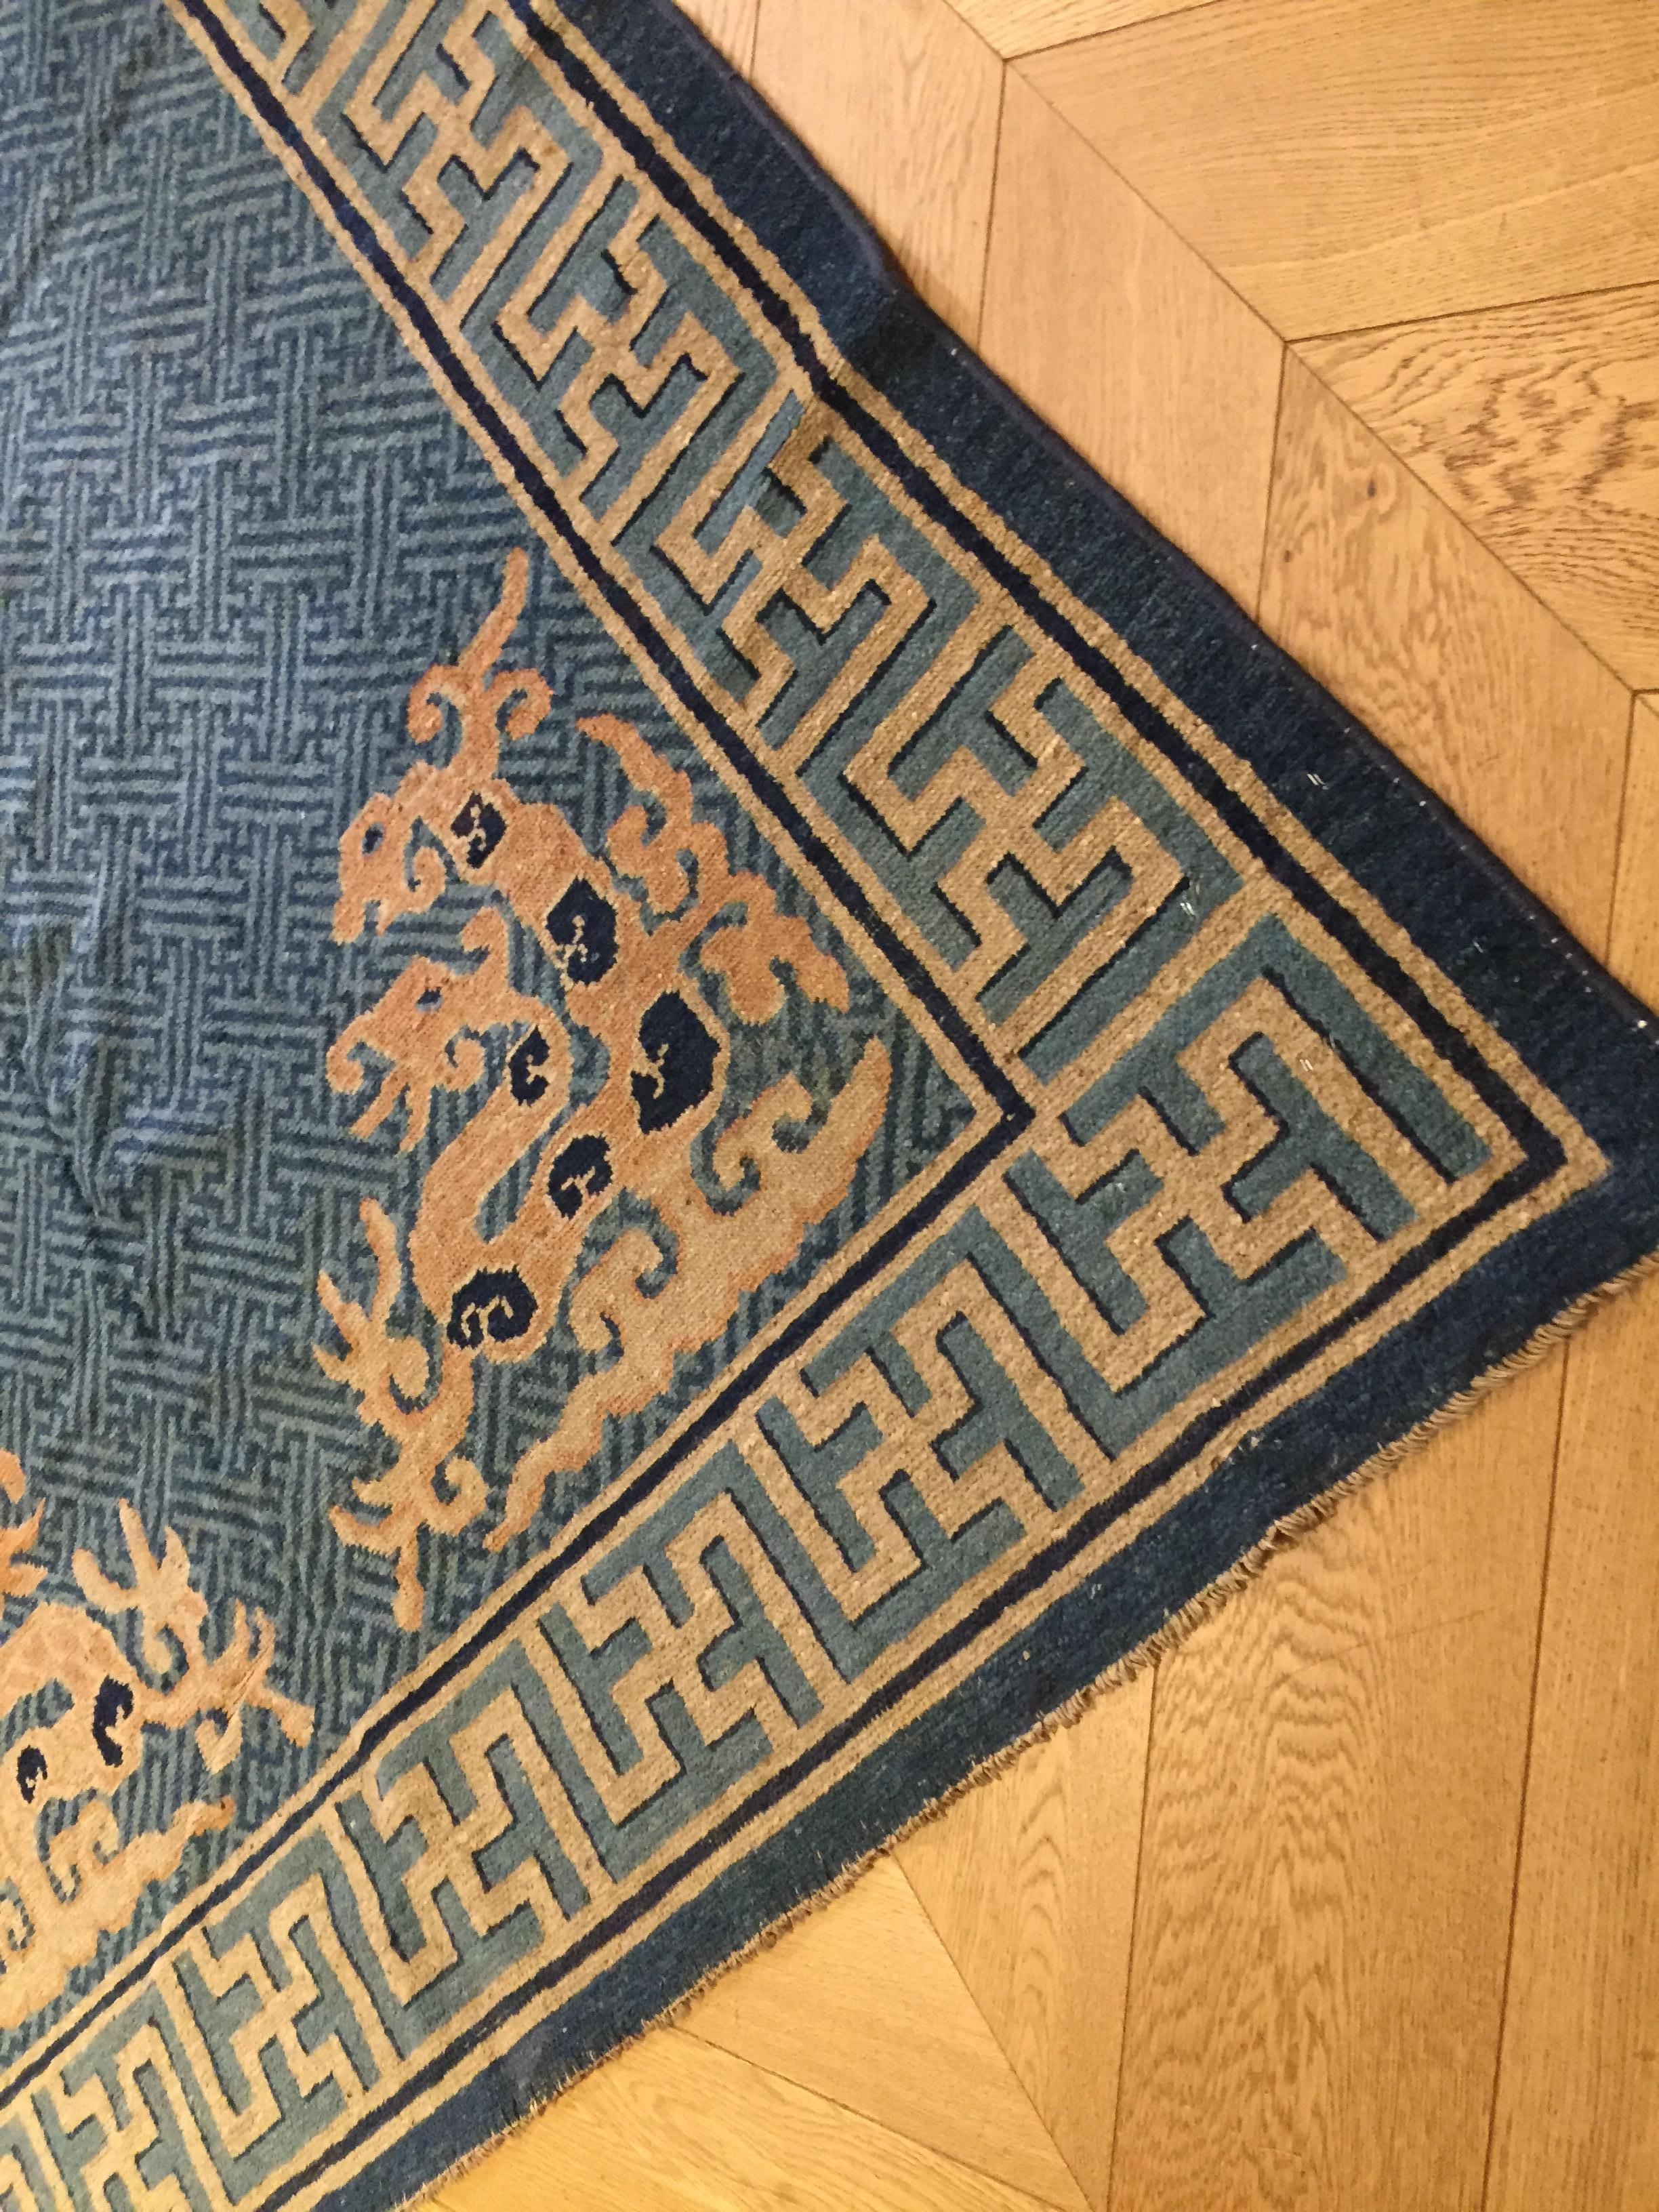 19th Century Chinese Hand-Knotted Rug Blu Beige with Stylized Spiritual Dragons For Sale 3